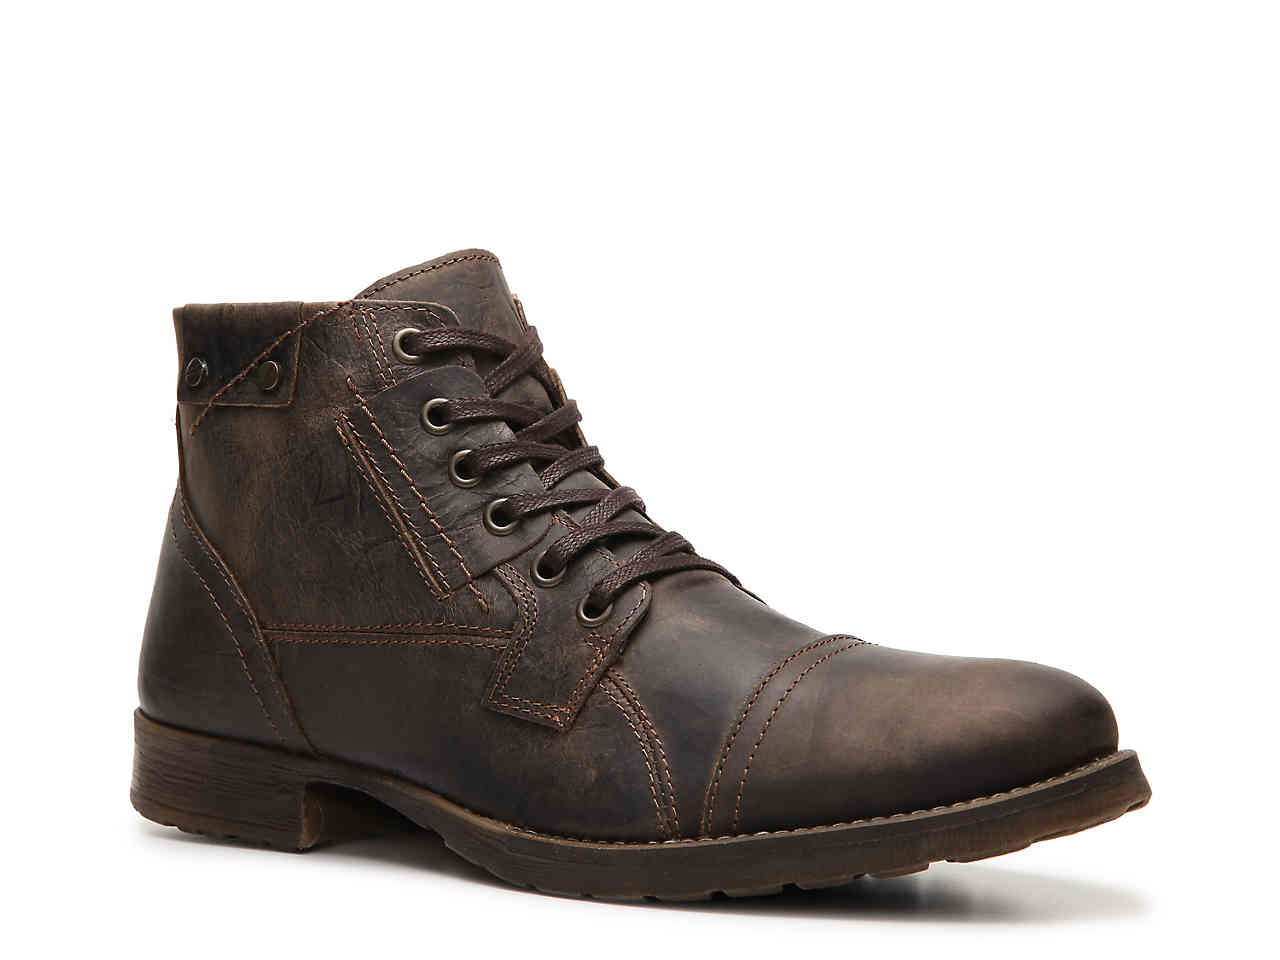 Bullboxer Shoes – Men’s shoes for every occasion